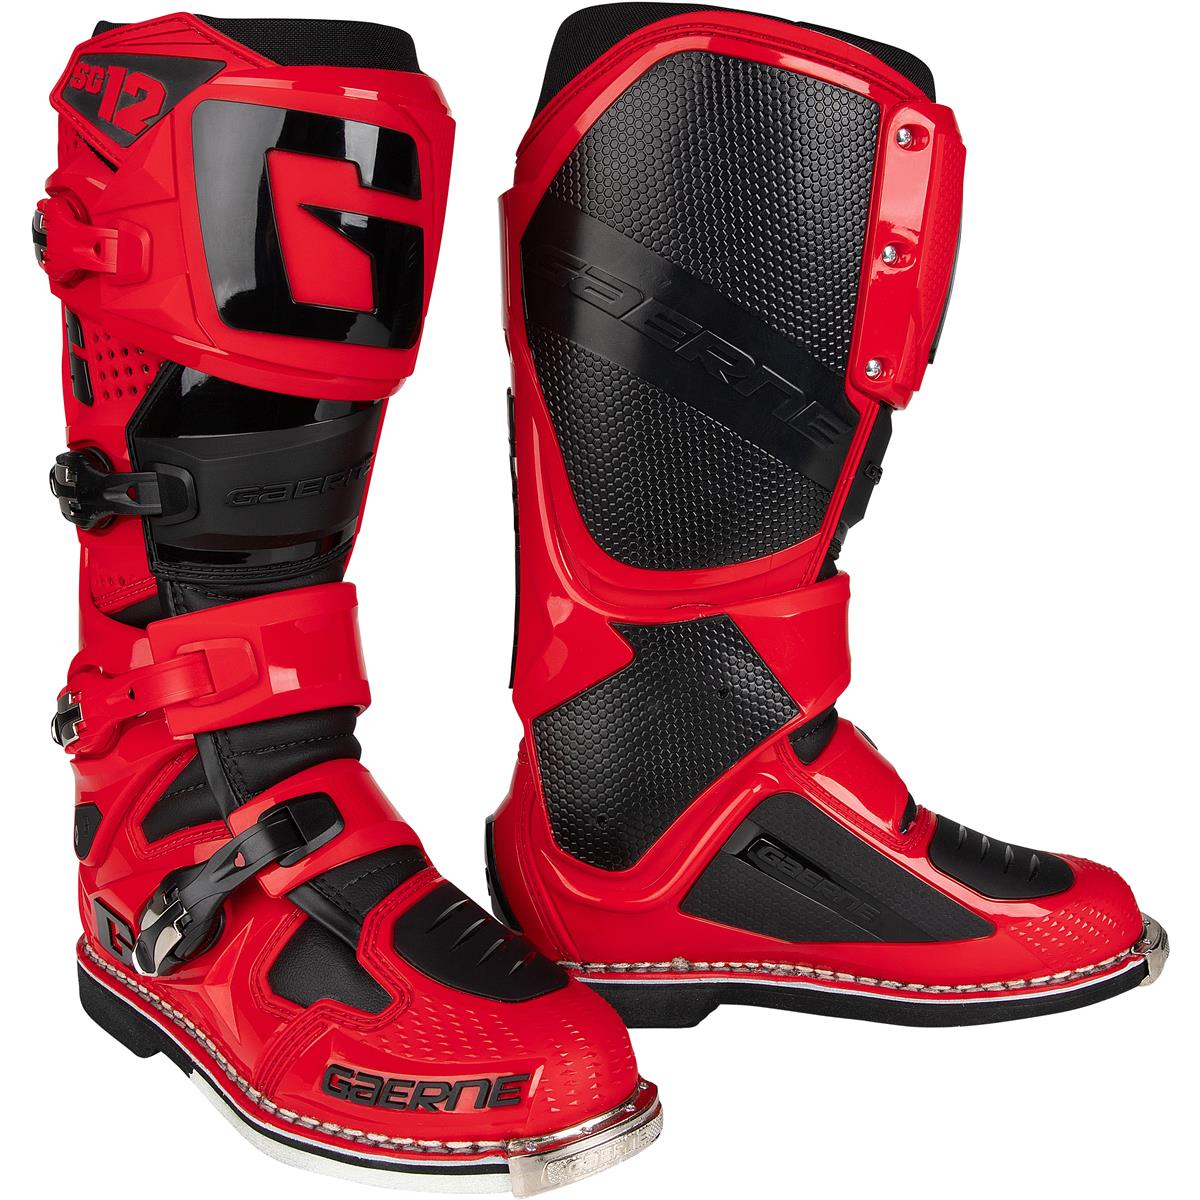 Gaerne MX Boots SG 12 Red/Black